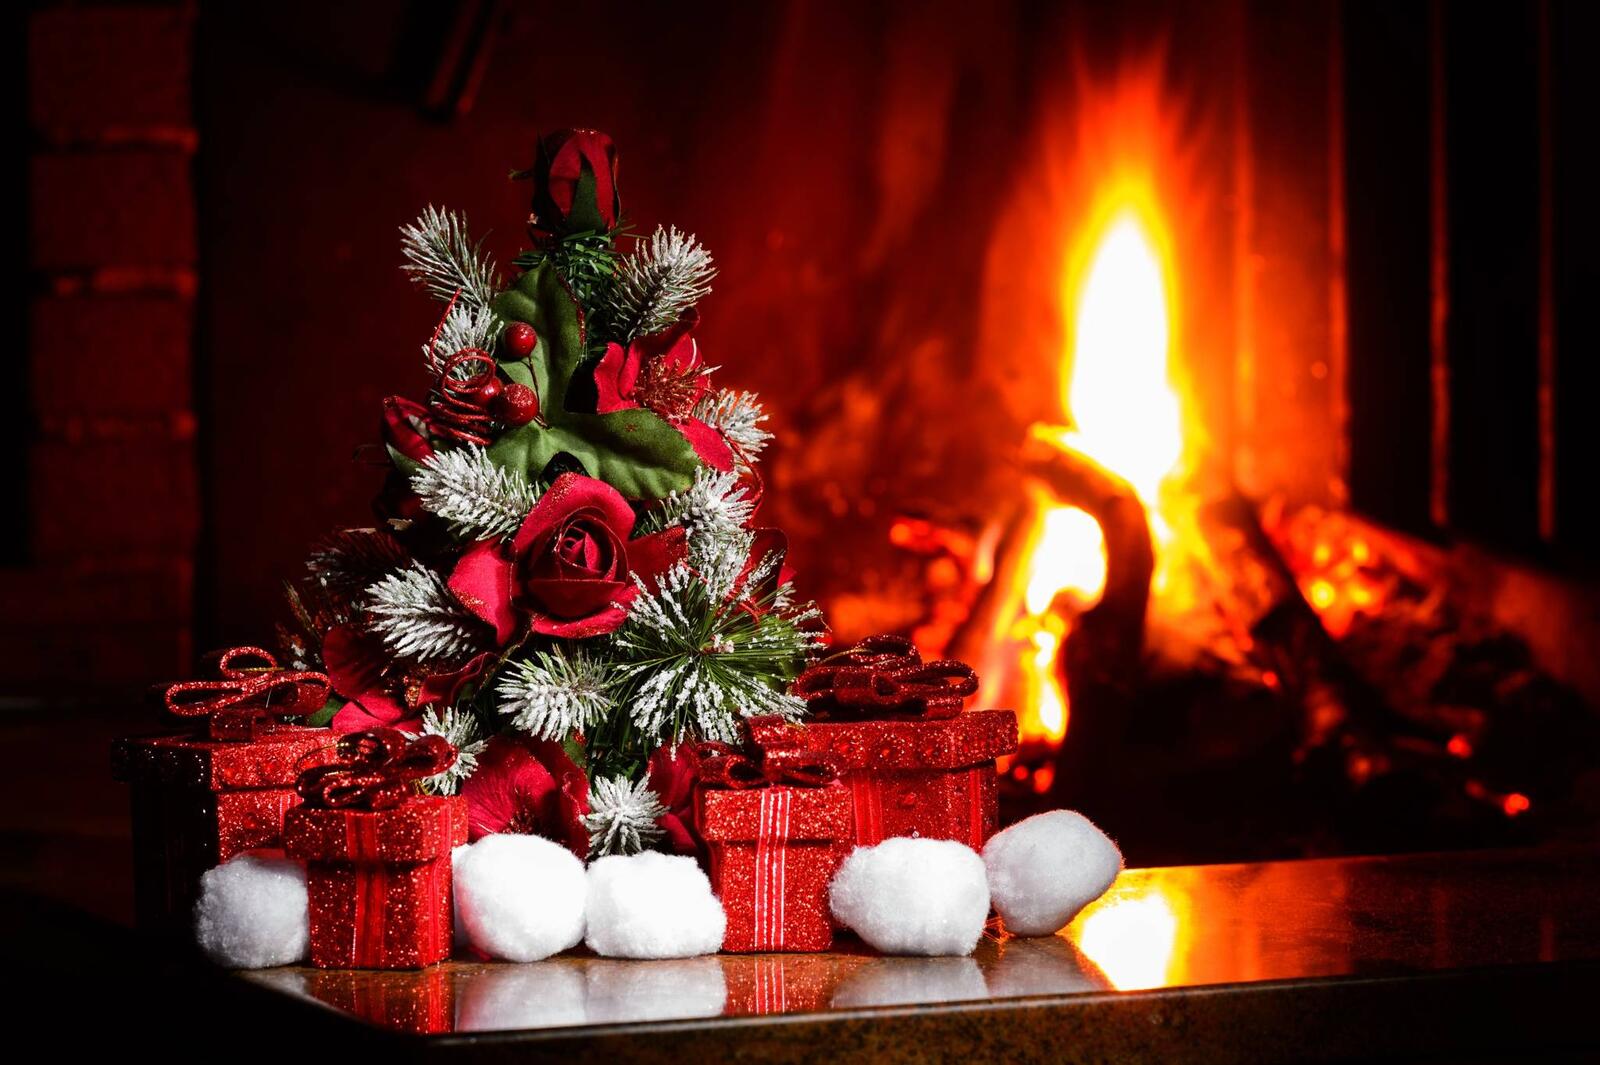 Wallpapers Christmas tree gifts fireplace on the desktop